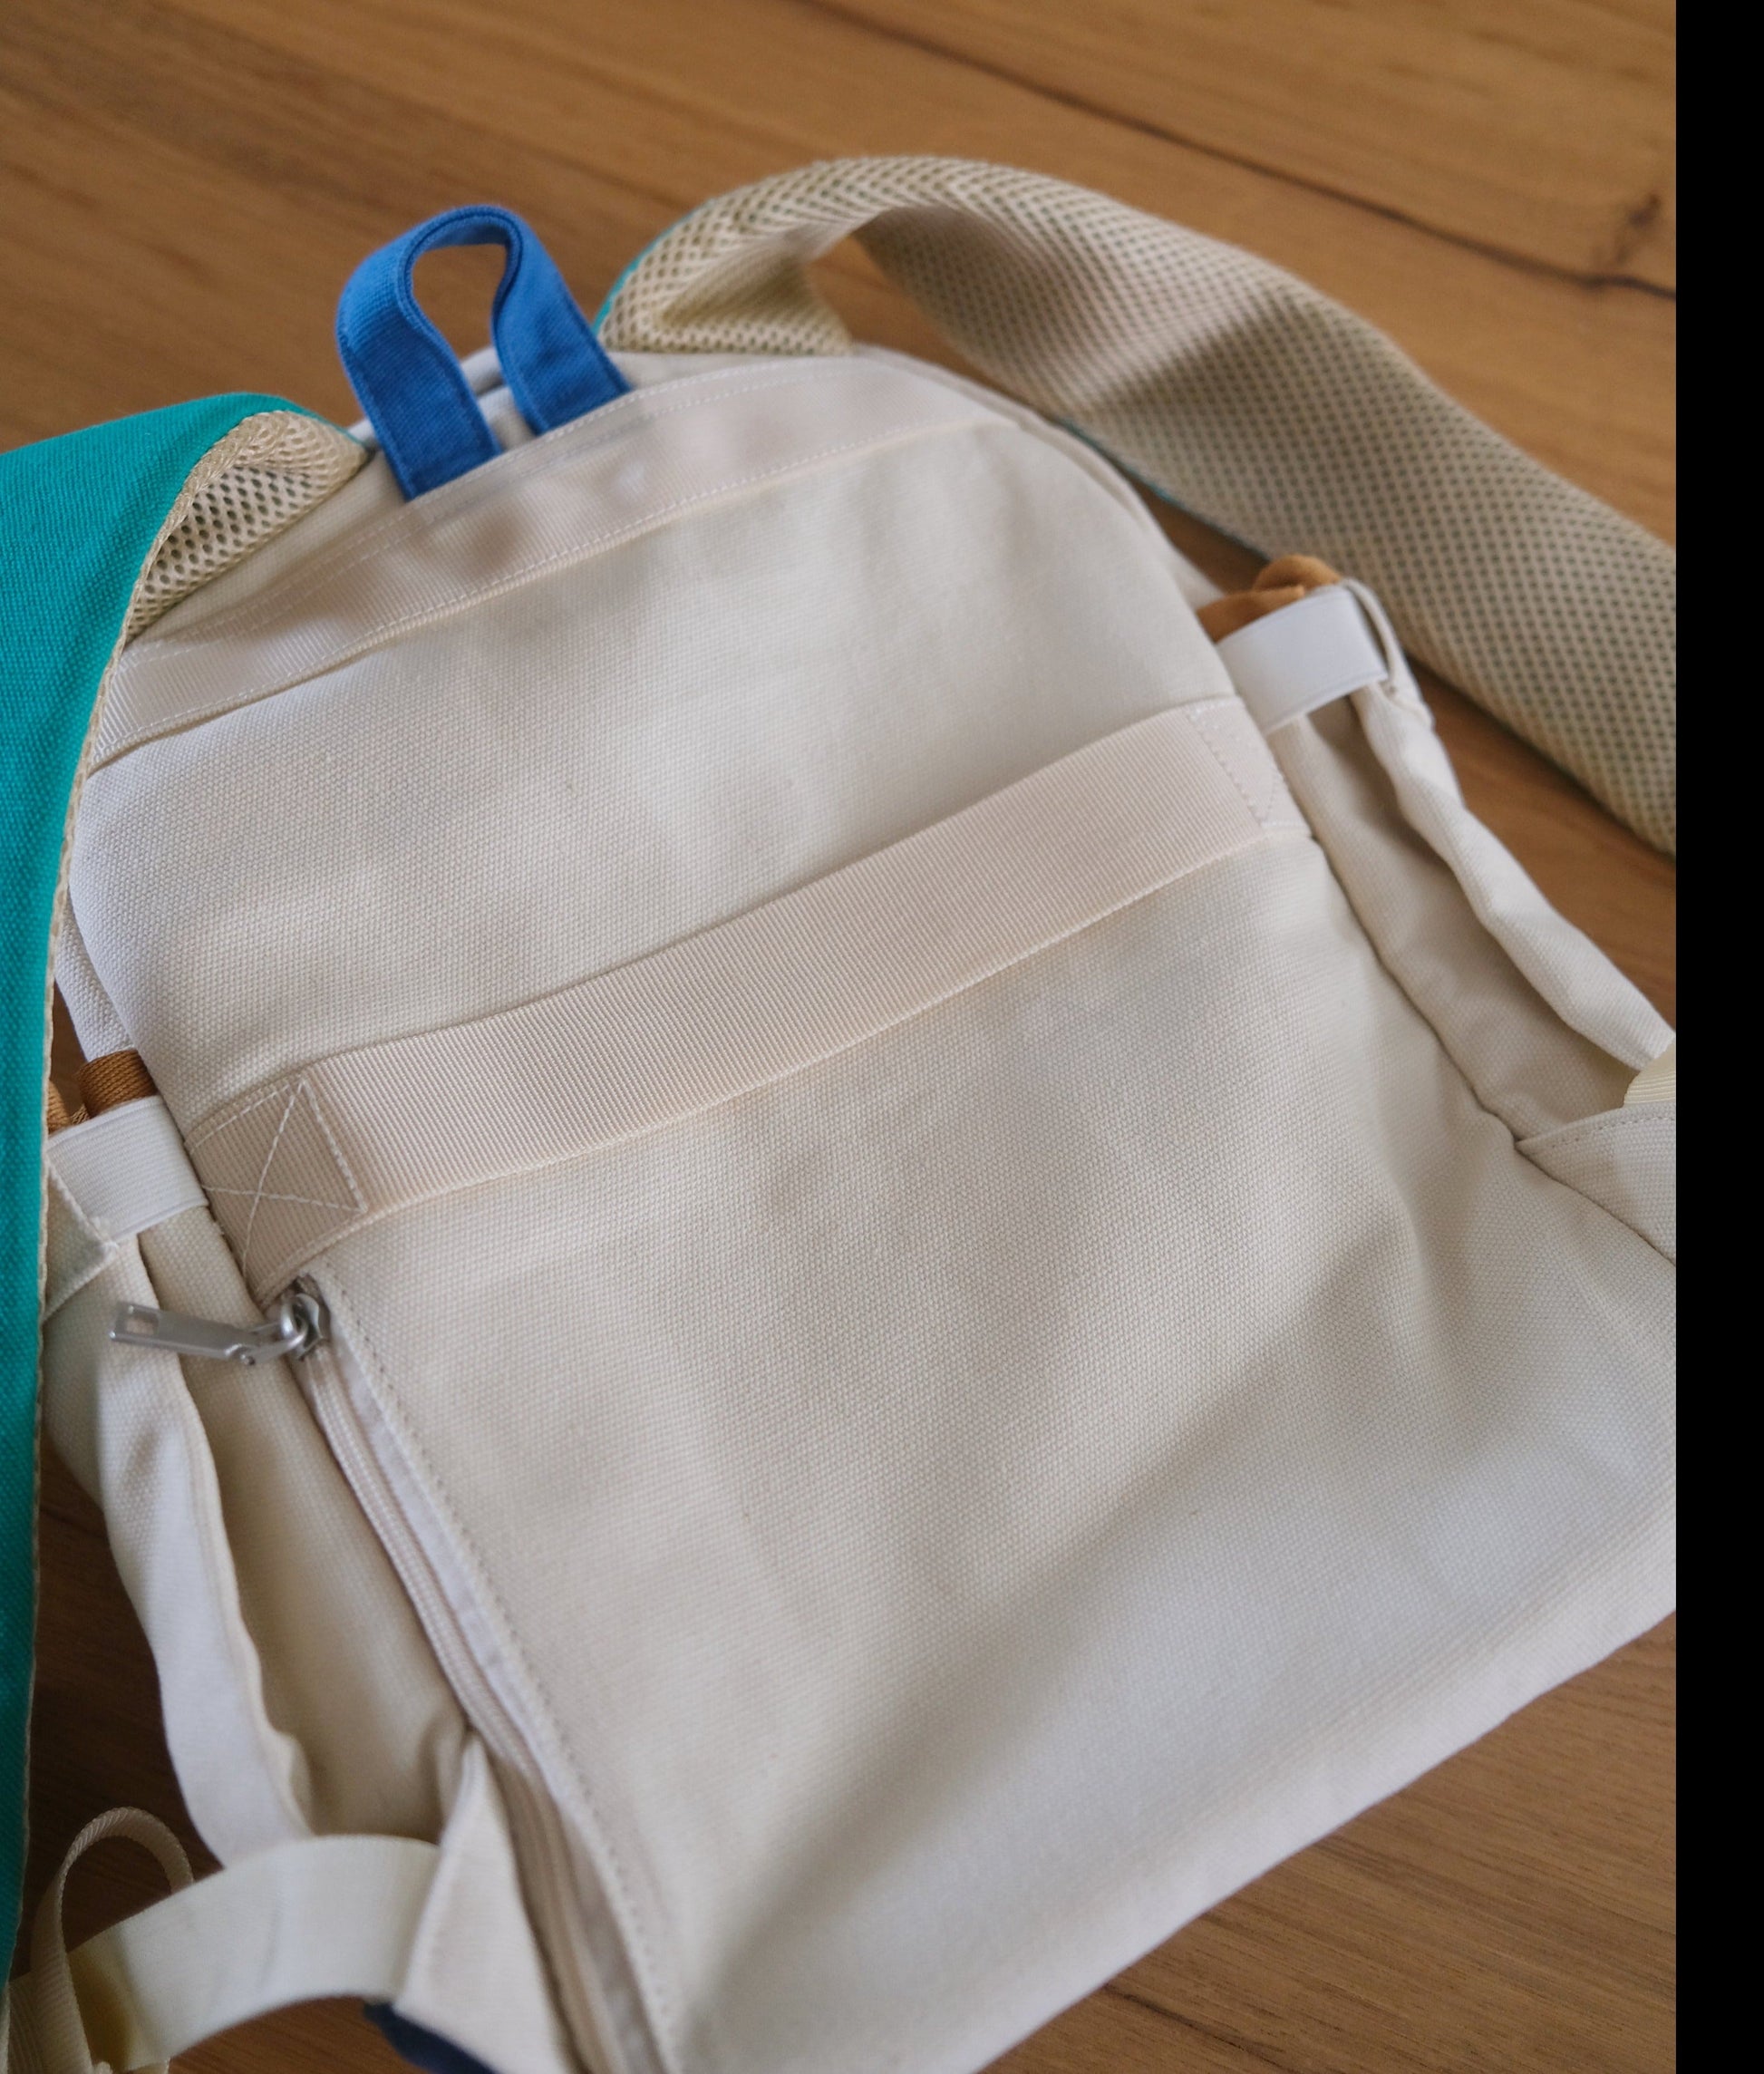 Limited Preorder: Large Analog No.1 Backpack (Water Repellent).